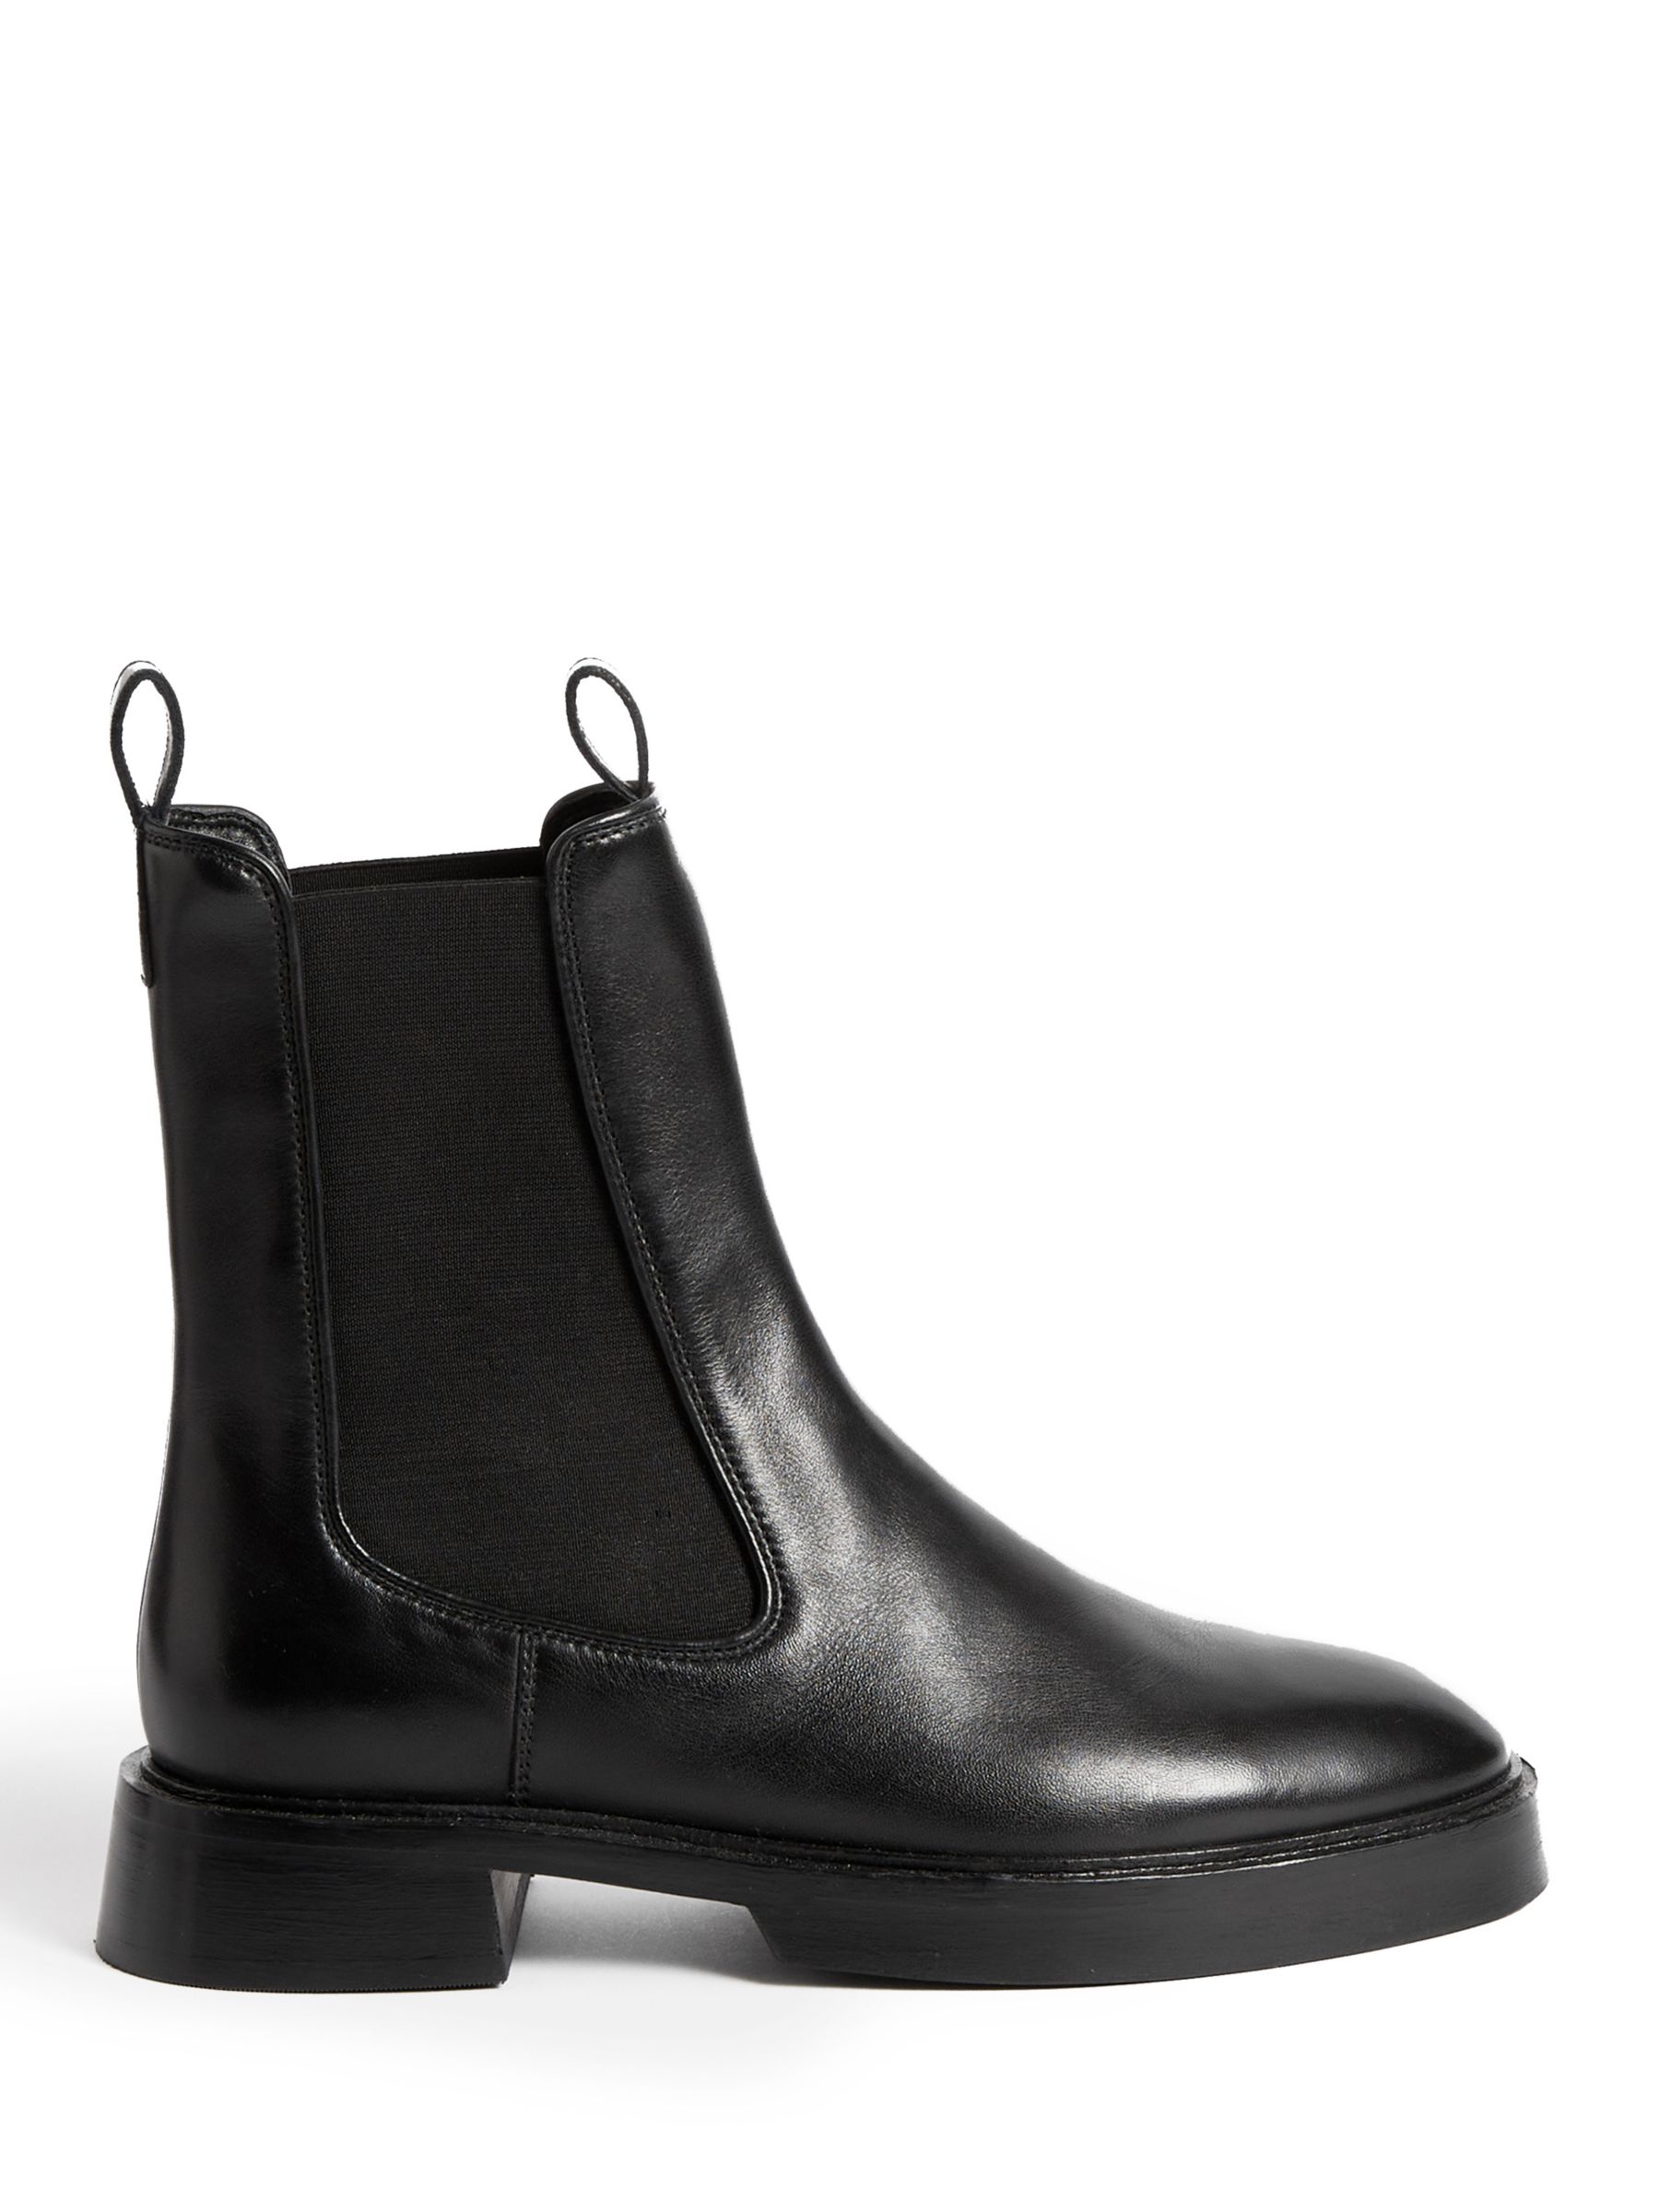 Jigsaw Leather Chelsea Boots, Black at John Lewis & Partners